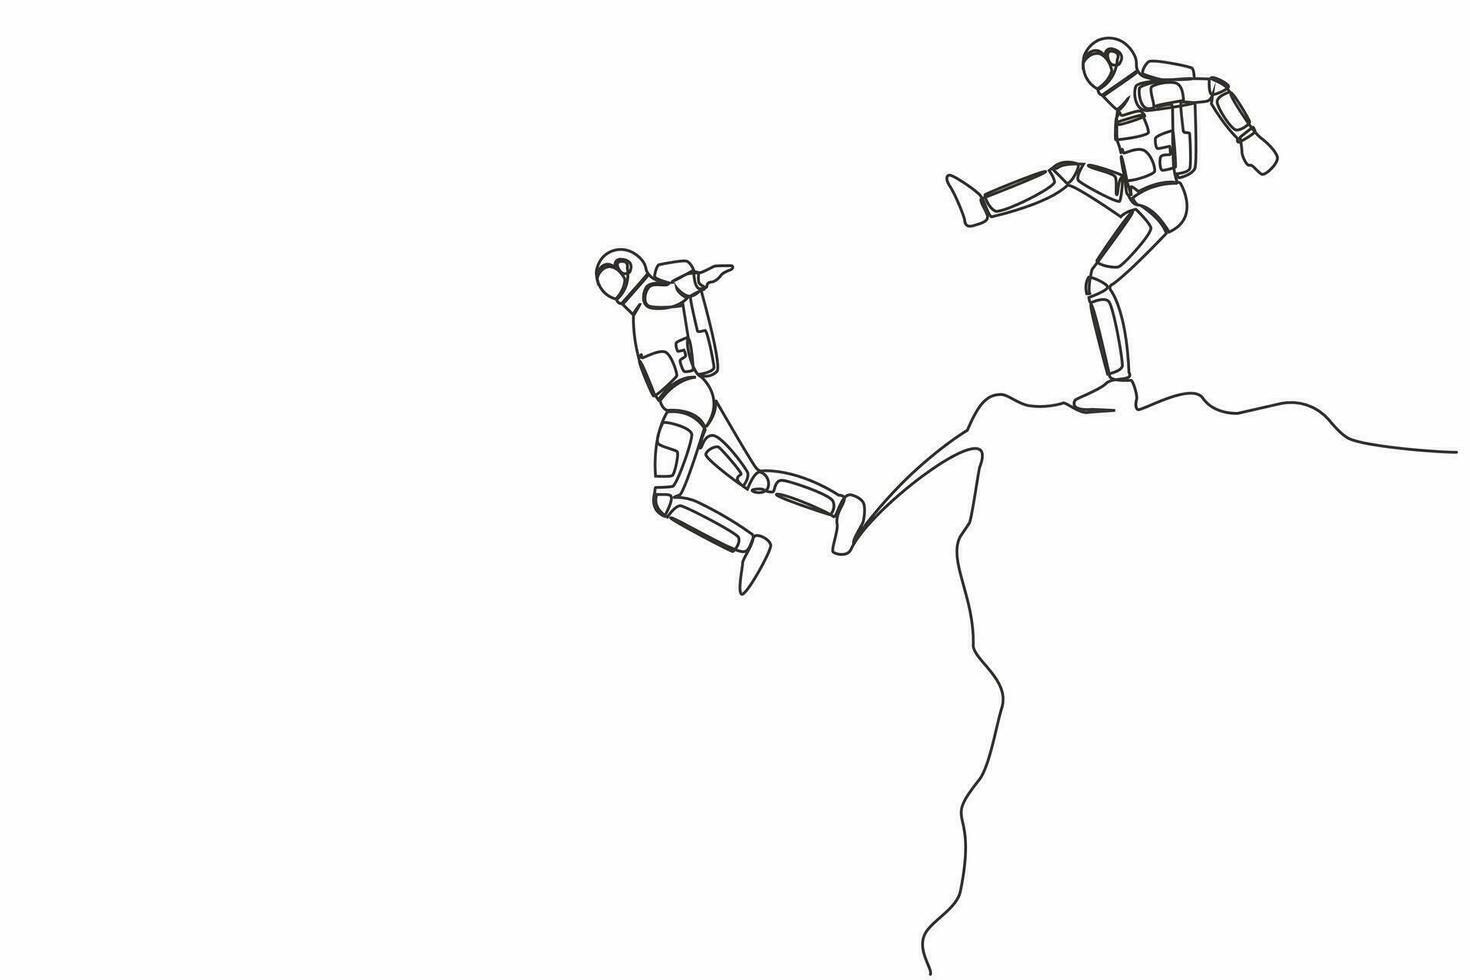 Single continuous line drawing young astronaut kick throw colleague off cliff or hill. Eliminate rival coworker. Rivalry and competition. Cosmonaut deep space. One line draw design vector illustration